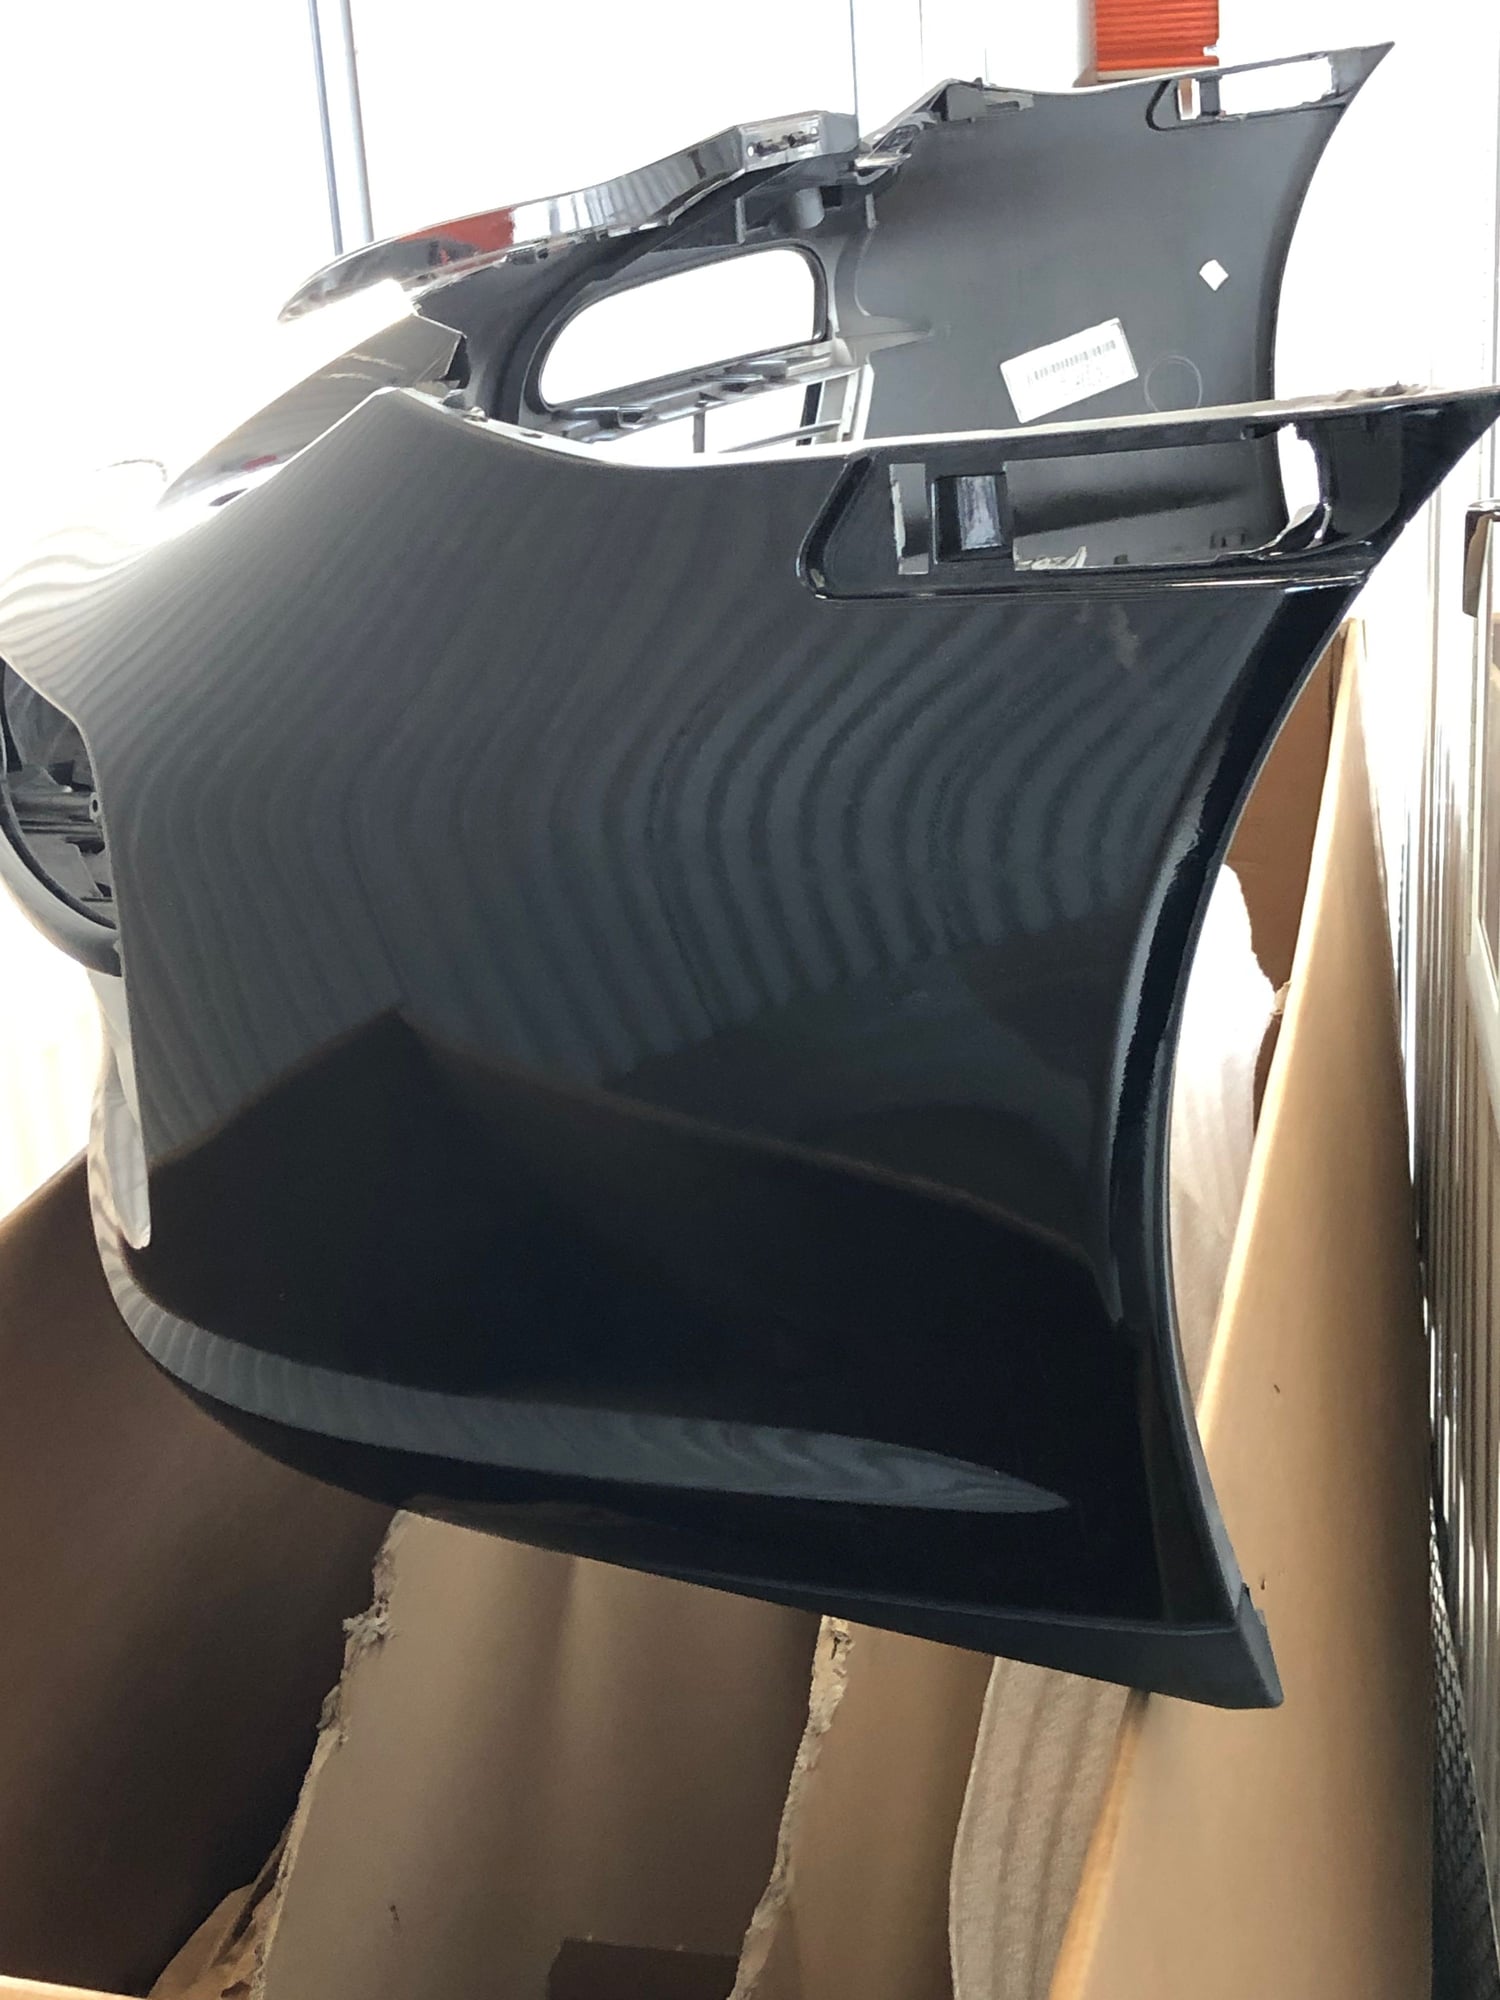 Exterior Body Parts - OEM Original PORSCHE 997.2 FRONT BUMPER Tackoff Black Original Paint protected by PPF - Used - 2009 to 2012 Porsche 911 - Bronx, NY 10451, United States